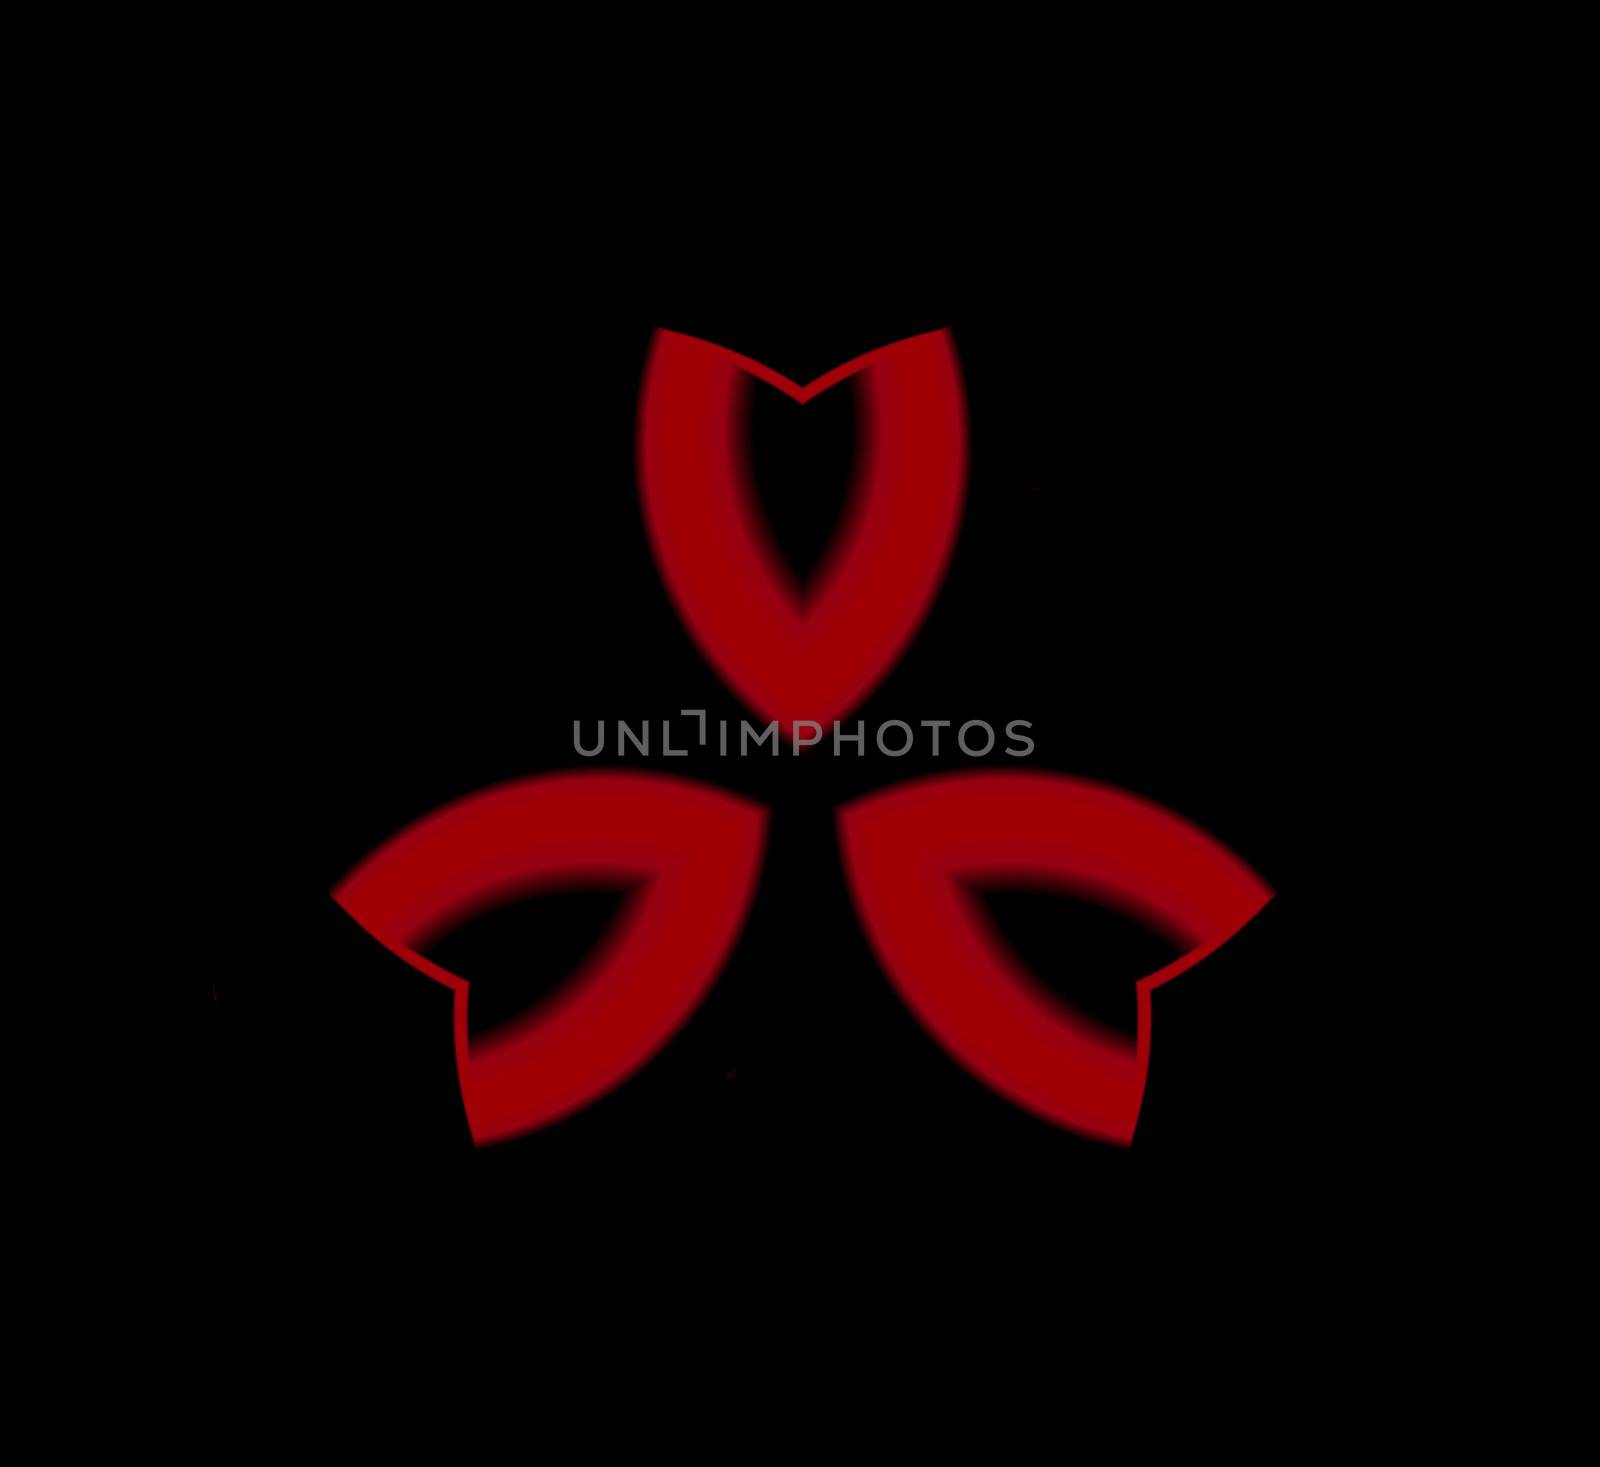 An abstract illustration done in red on a black background. It has three leaf shaped elements with a vee shaped tip to the ends of the leaves to give a more contemporary sleeker look to the design.